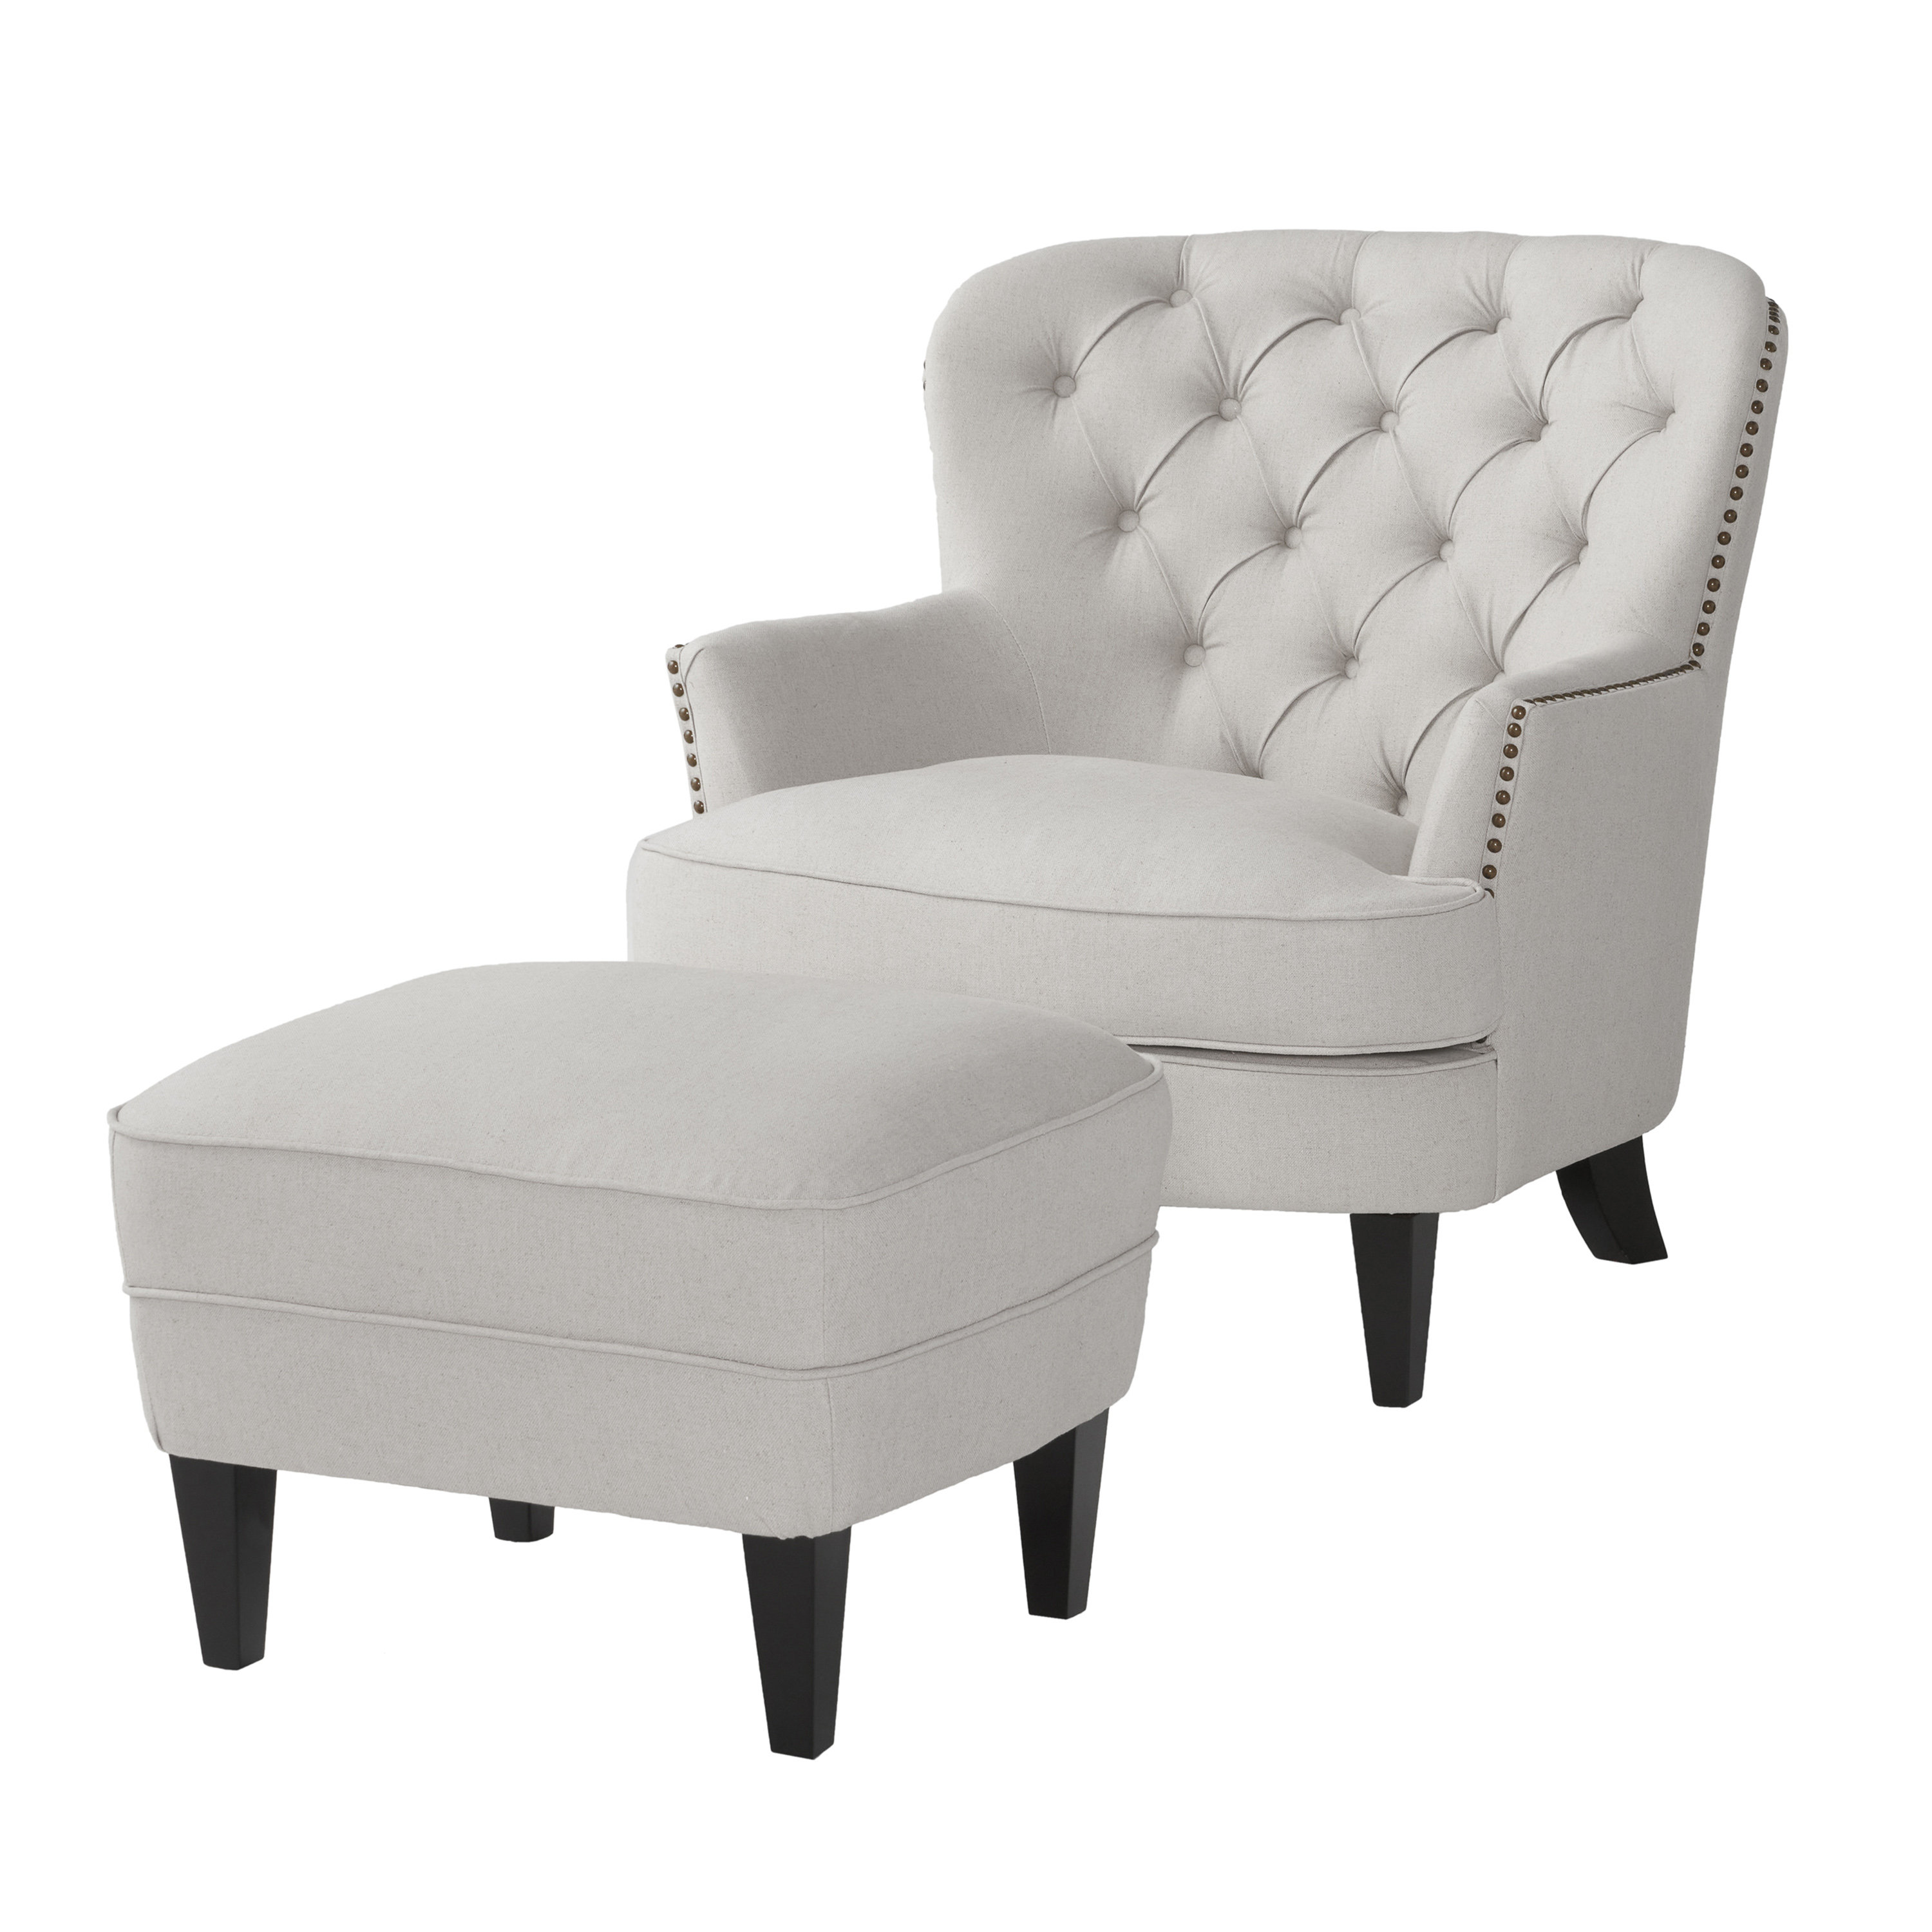 Dannesha 32.5” Wide Tufted Armchair and Ottoman